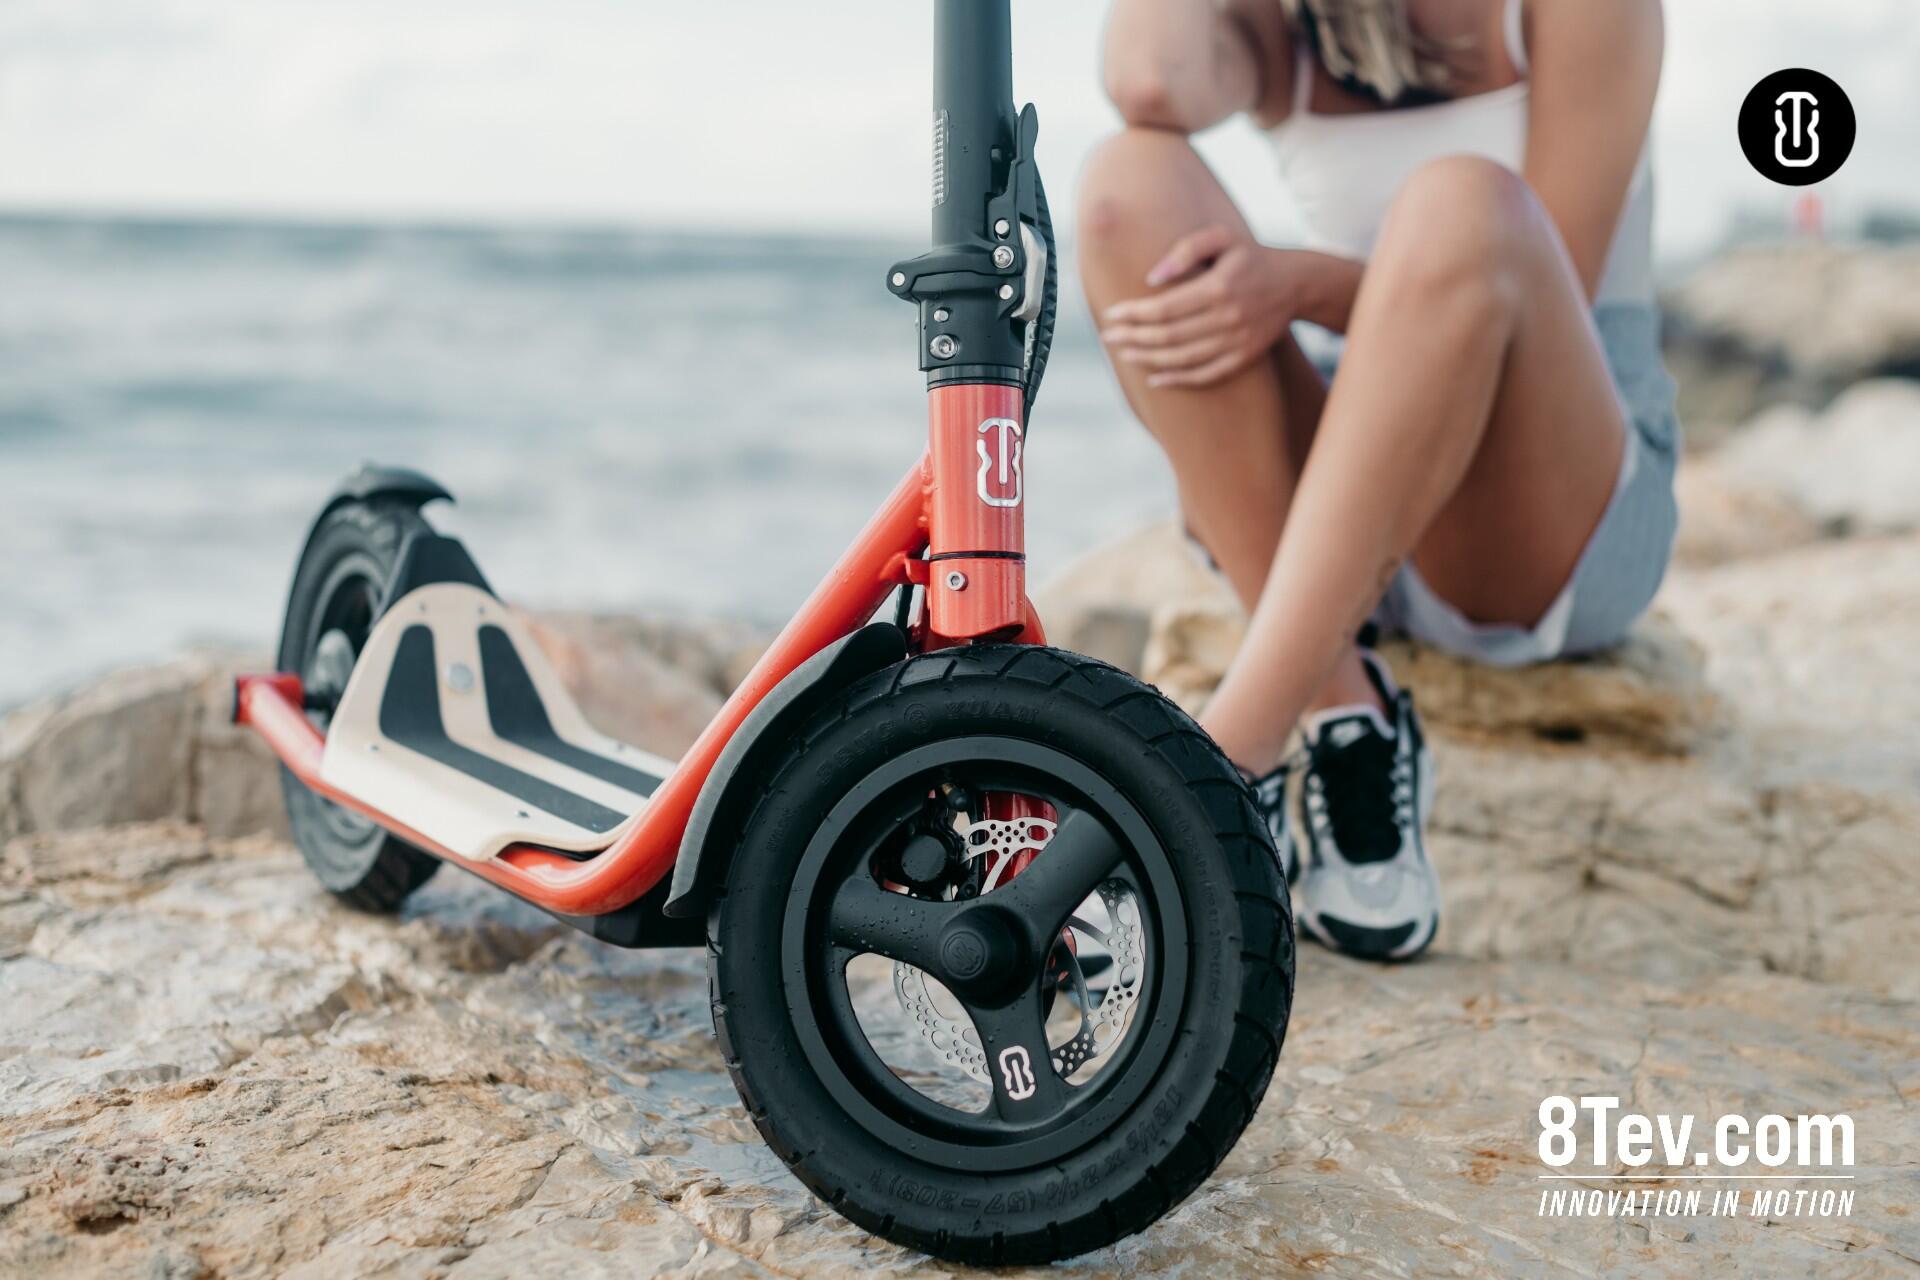 8Tev Adult Electric Scooter, B12 Proxi, Red 5/5